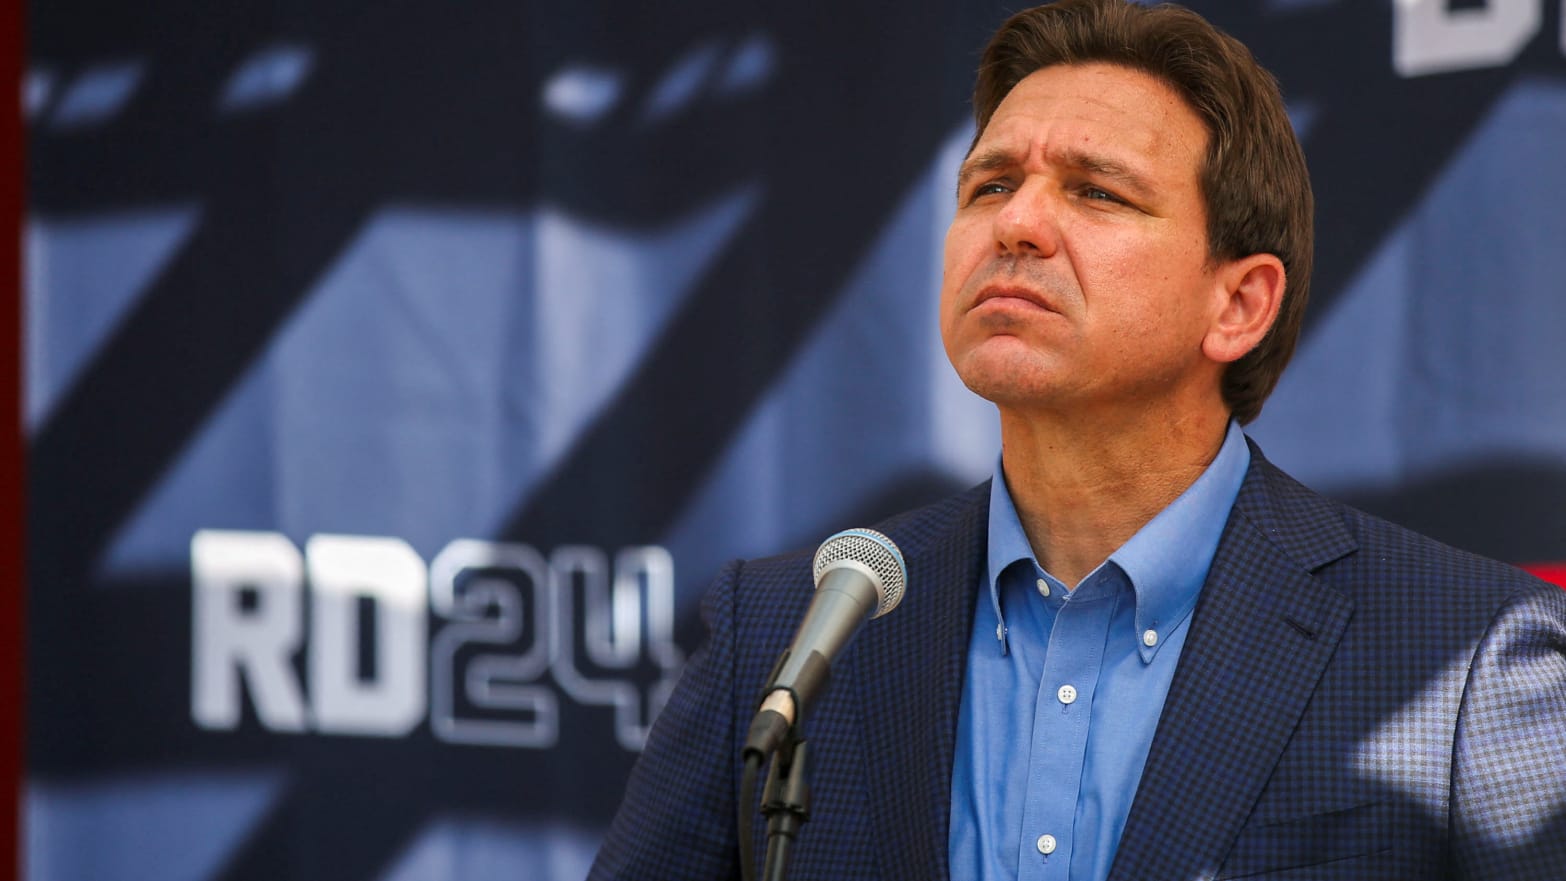 Florida Governor and Republican U.S. presidential candidate Ron DeSantis attends a barbecue hosted by former diplomat Scott Brown, as part of his \"No B.S. Backyard BBQ\" series, in Rye, New Hampshire, U.S. July 30, 2023.